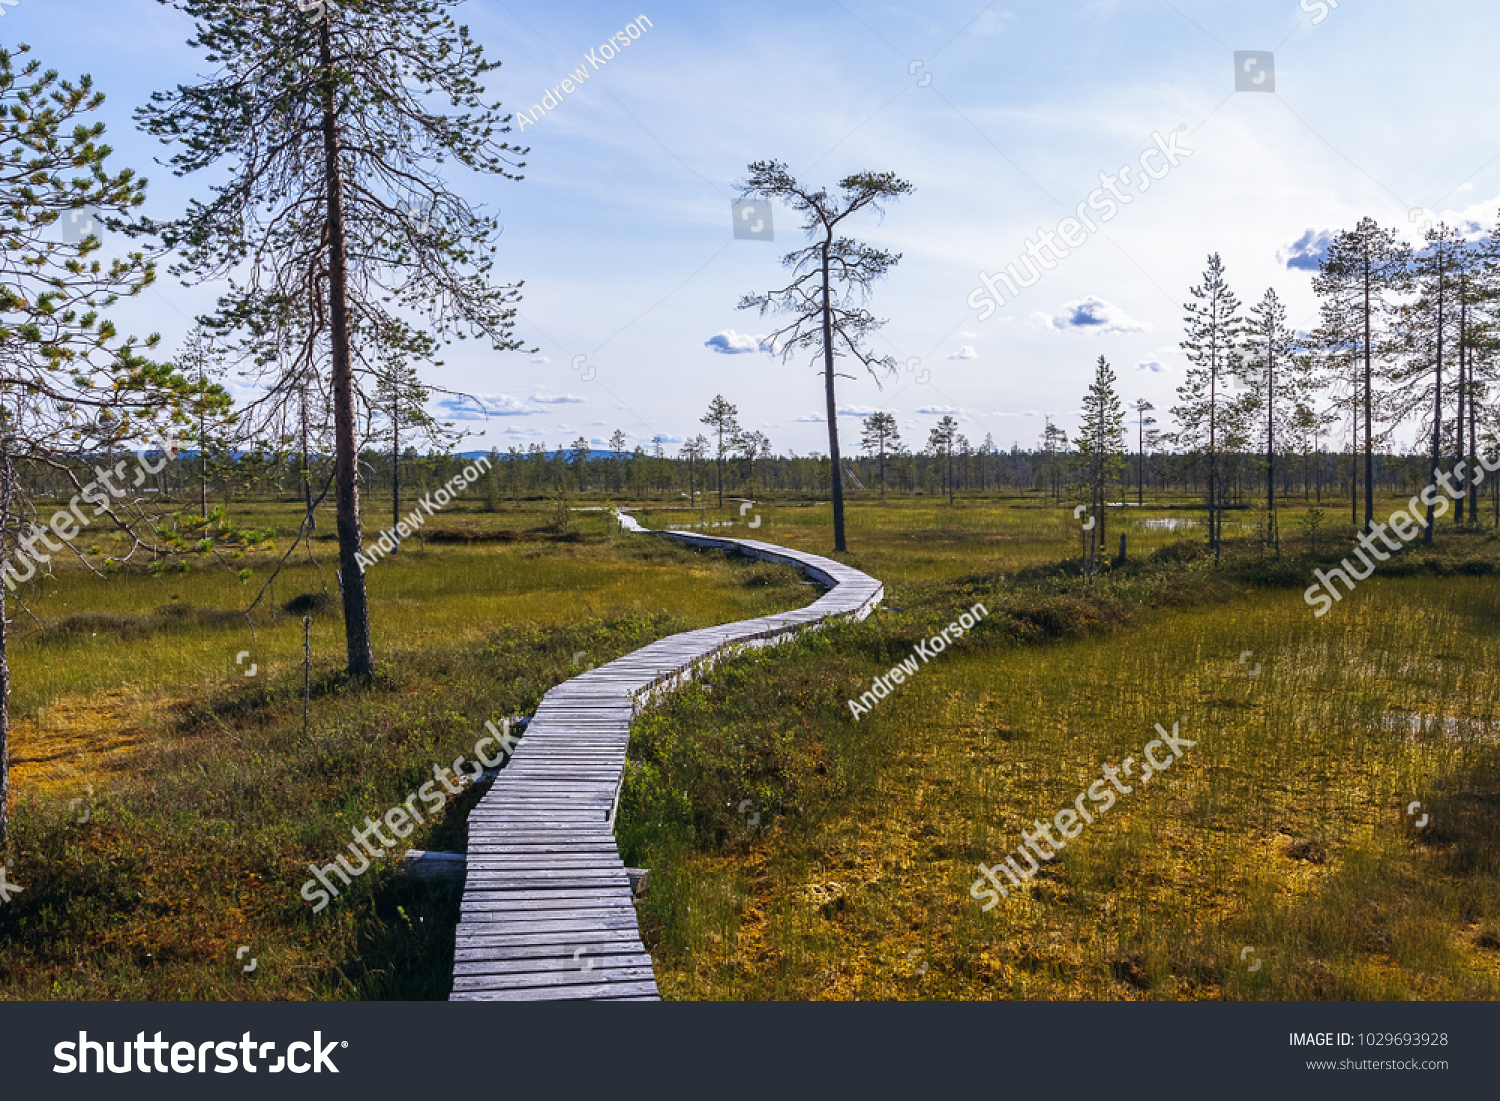 A long narrow boardwalk winds through a swampy low land area in Northern Finlands Pyha-Luosto National Park. Pine trees a scattered throughout the swampy field.  #1029693928